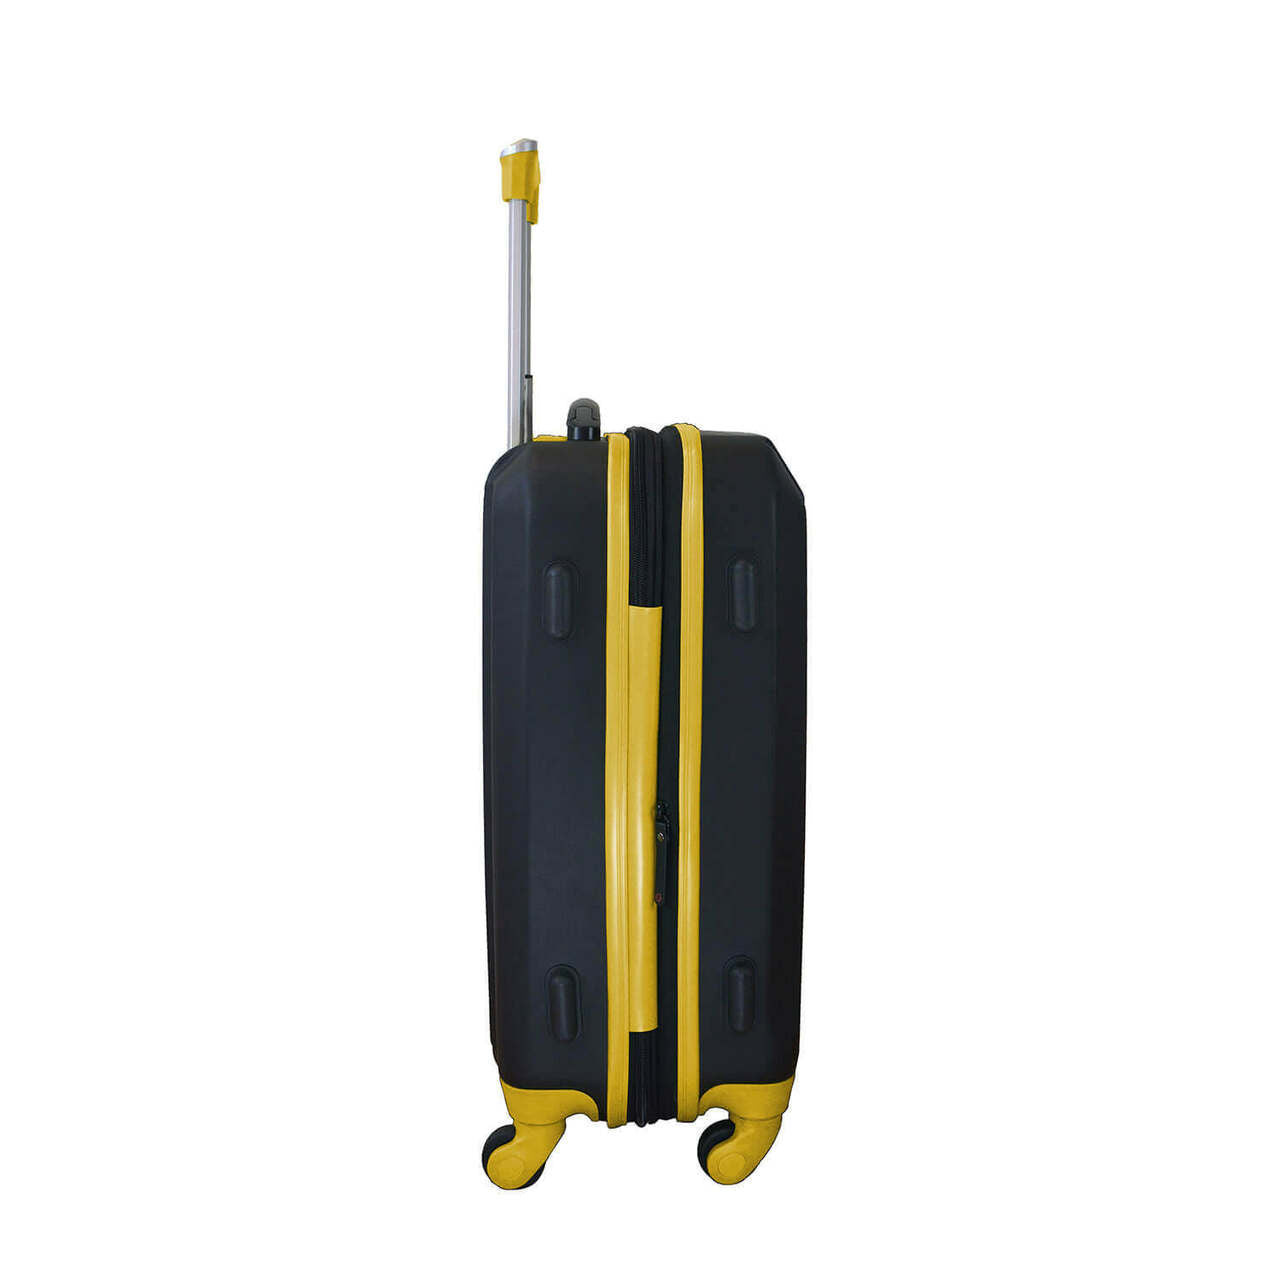 Wyoming arry On Spinner Luggage | Wyoming Hardcase Two-Tone Luggage Carry-on Spinner in Yellow